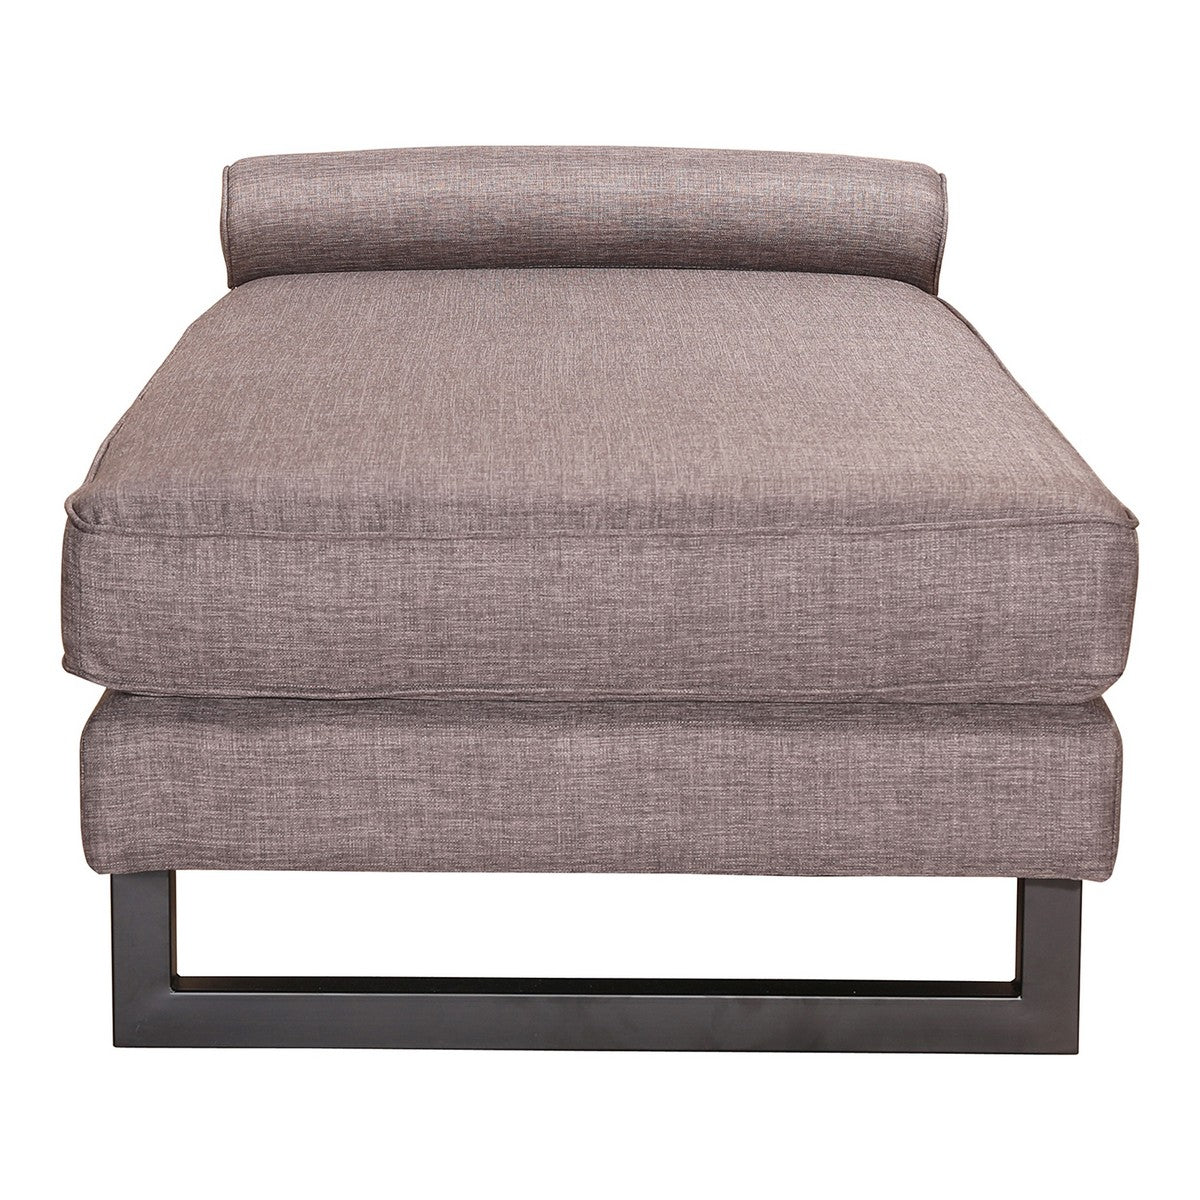 Moe's Home Collection Amadeo Daybed Grey - RN-1037-35